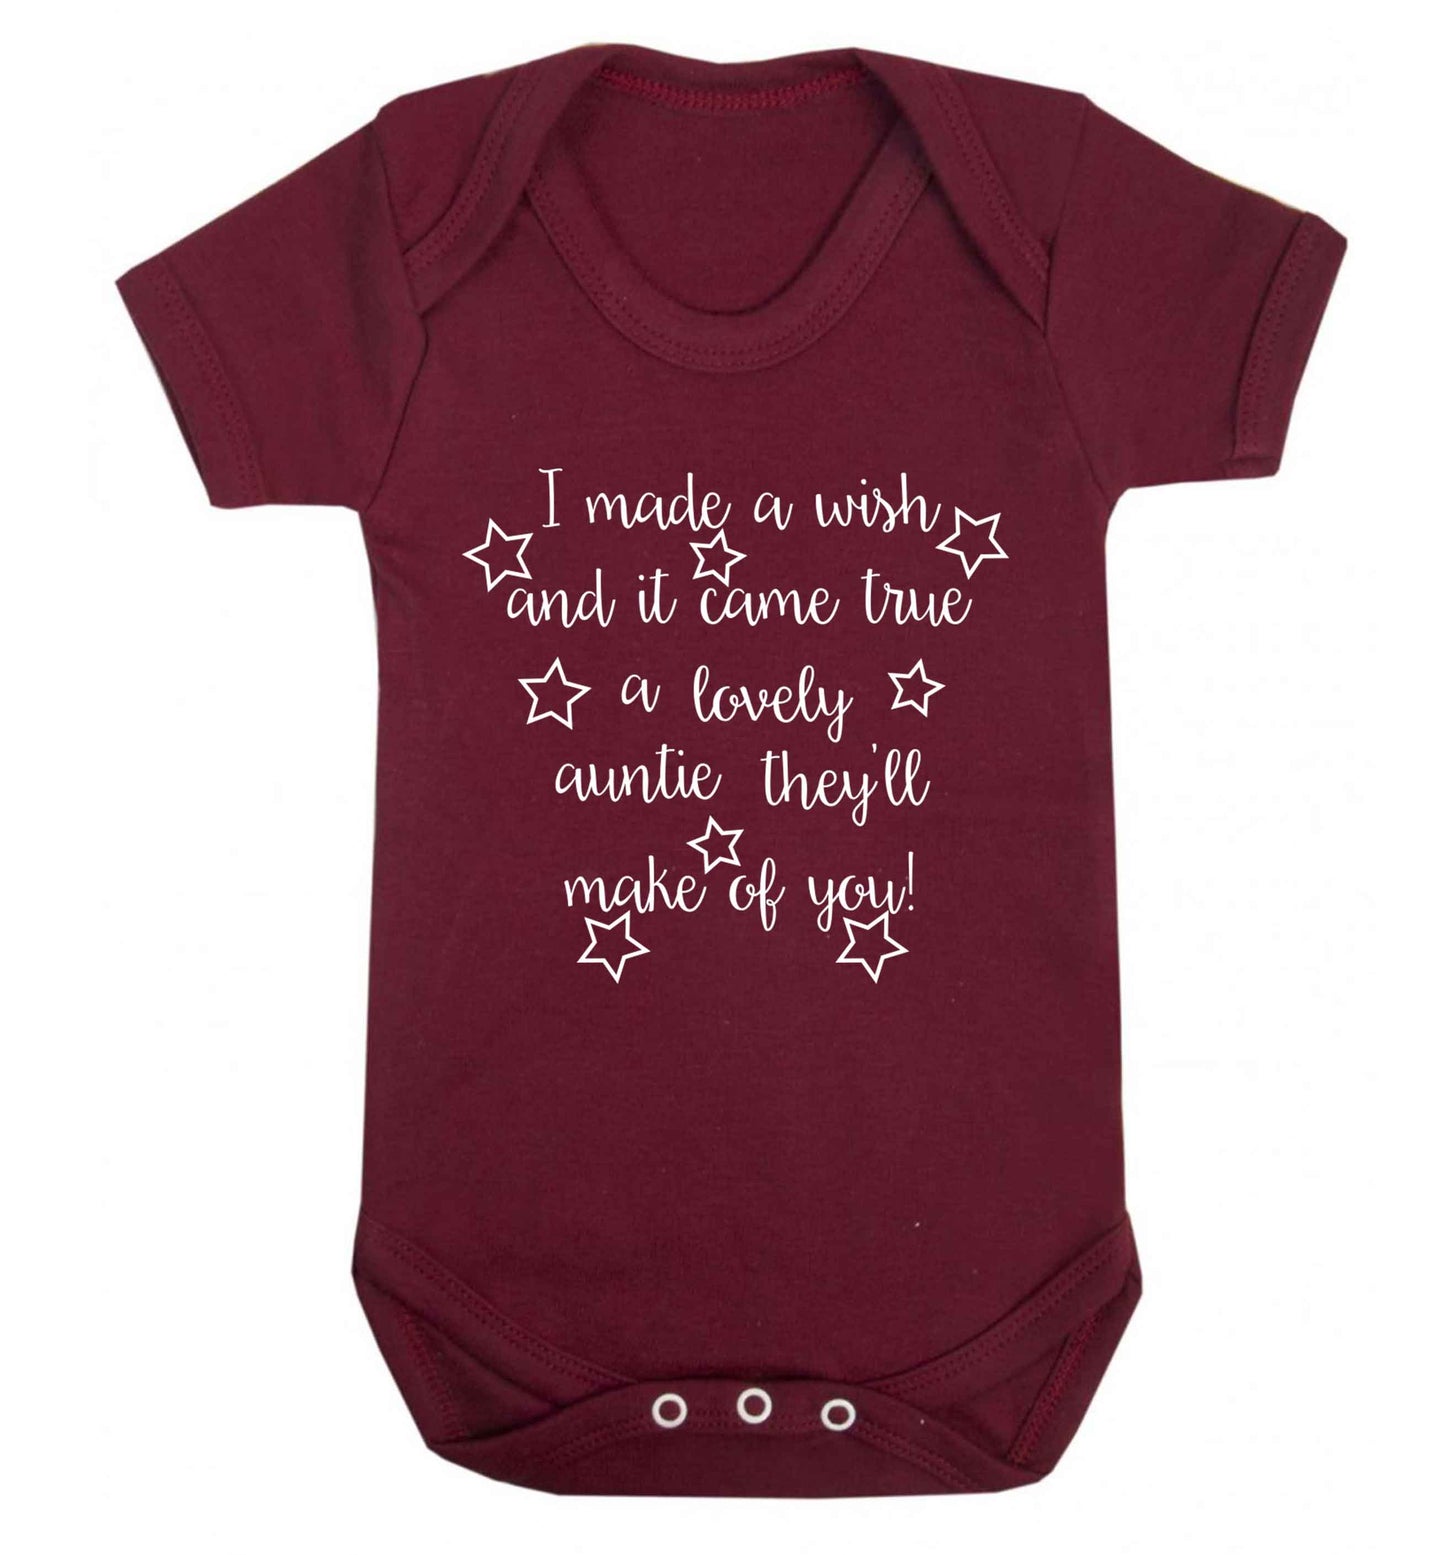 I made a wish and it came true a lovely auntie they'll make of you! Baby Vest maroon 18-24 months